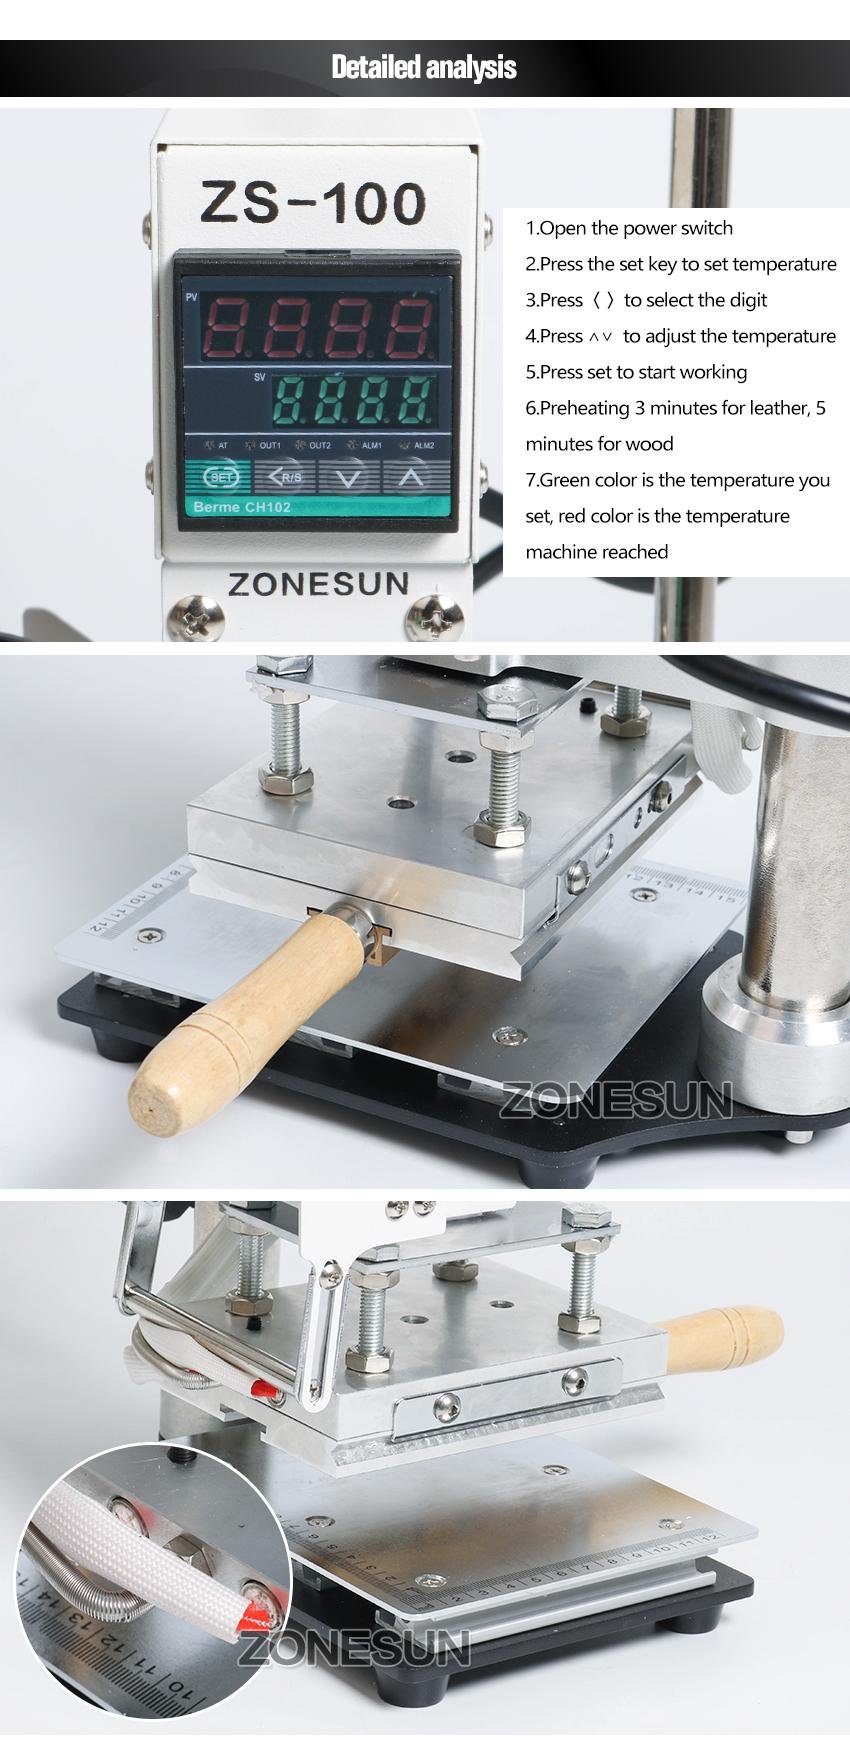 ZONESUN Hot Foil Stamping Machine Manual Bronzing Machine for PVC Card leather a 5